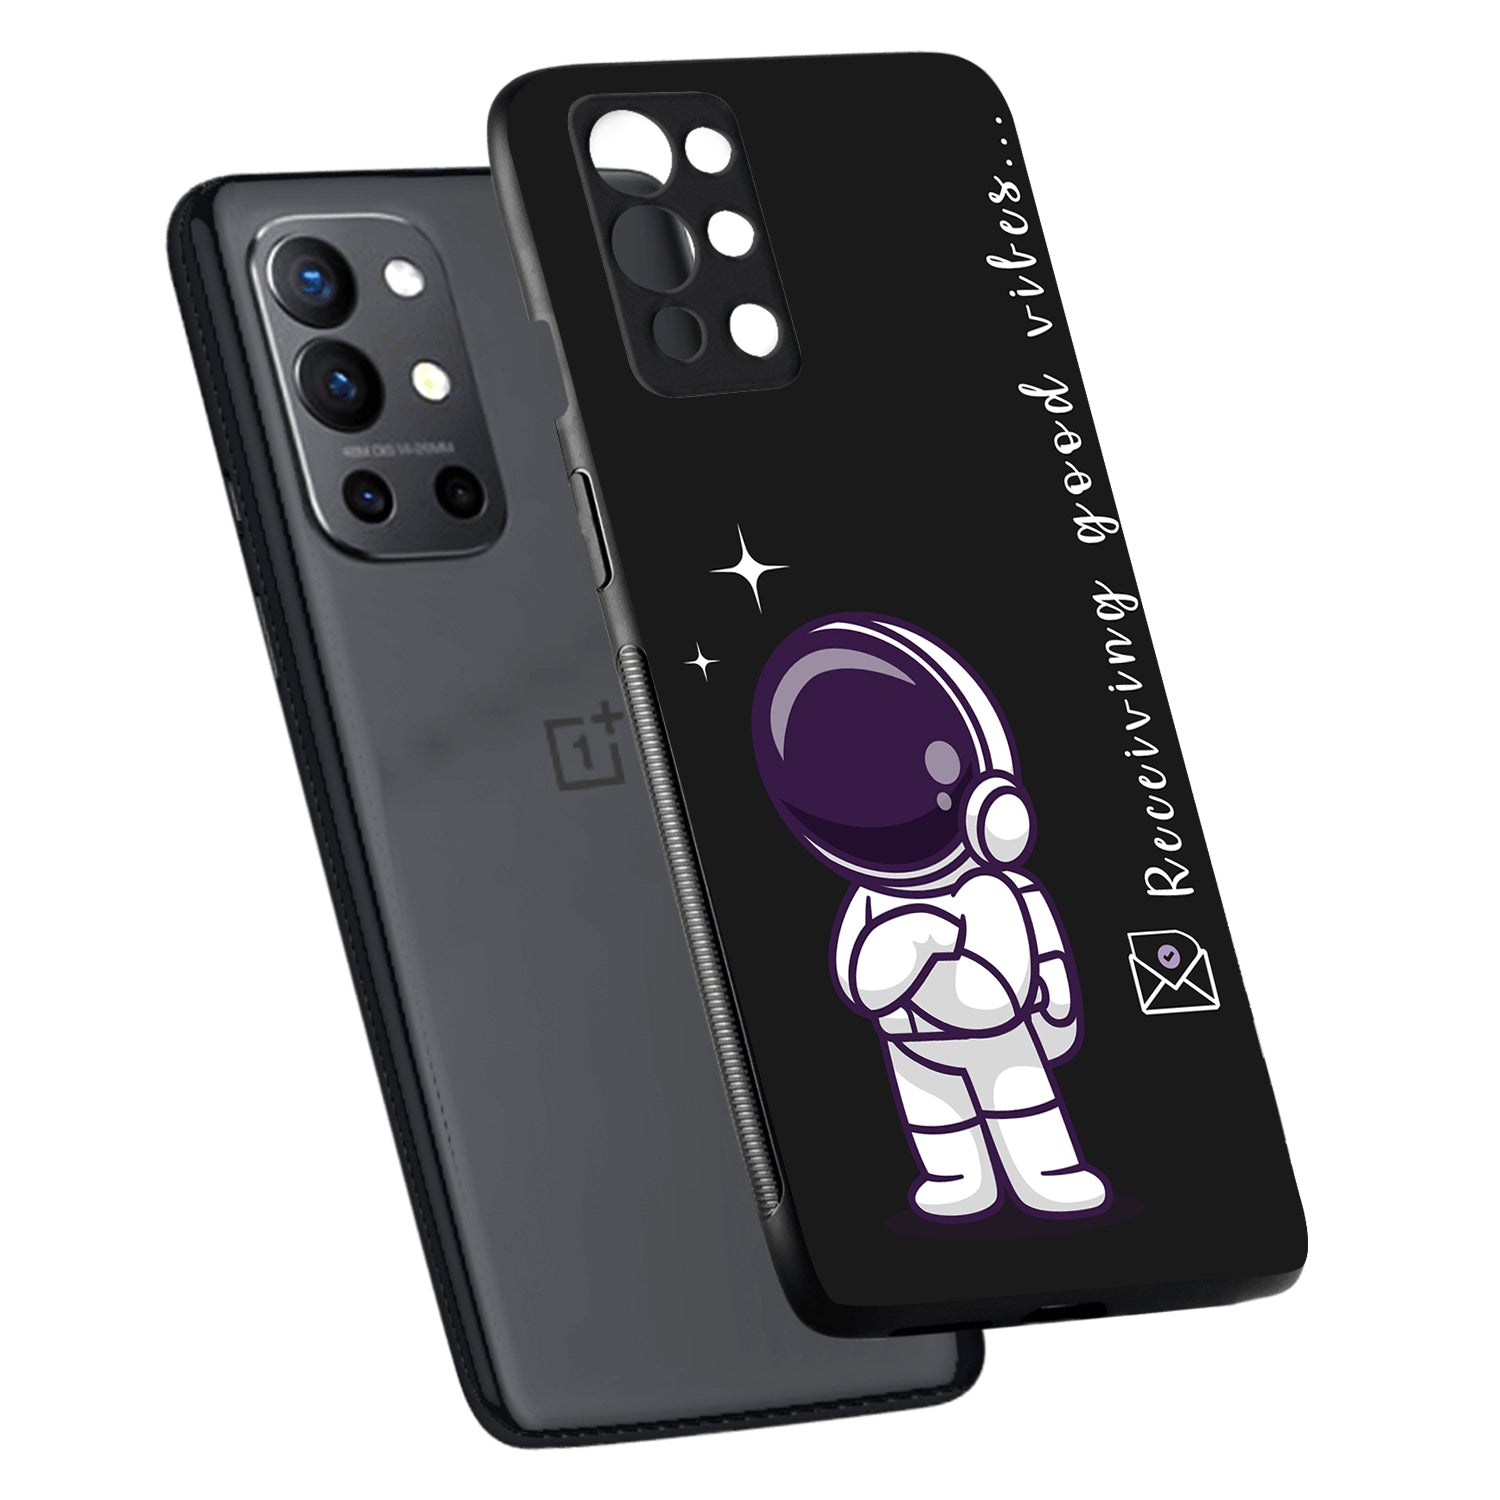 Receiving Good Vibes Bff Oneplus 9 R Back Case